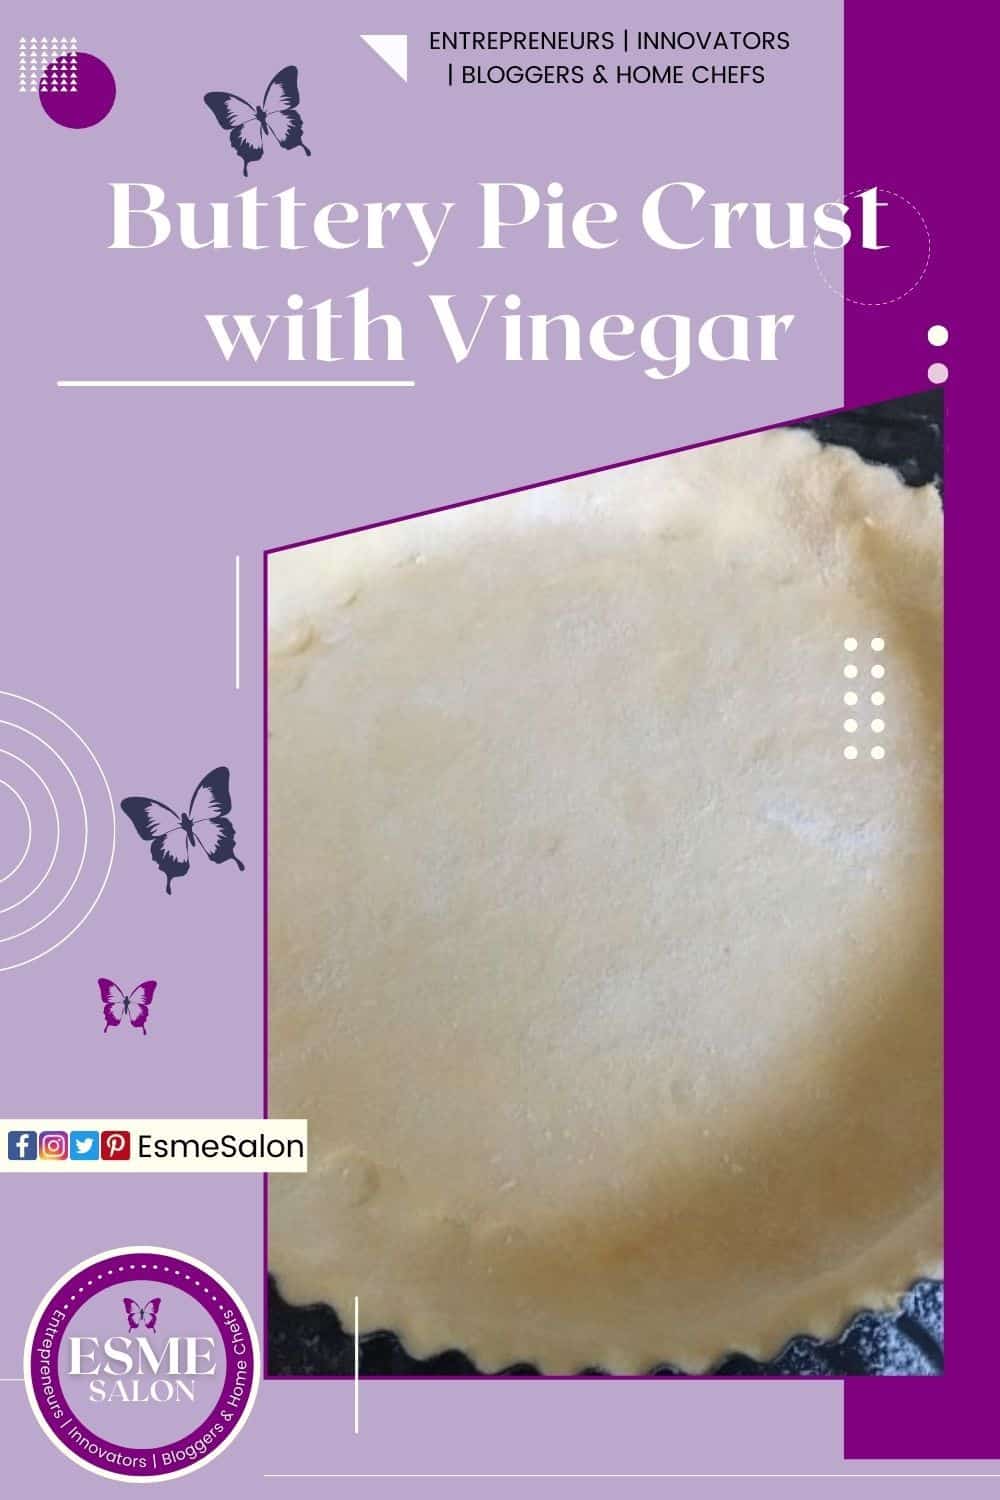 An image of a single Buttery Pie Crust with Vinegar